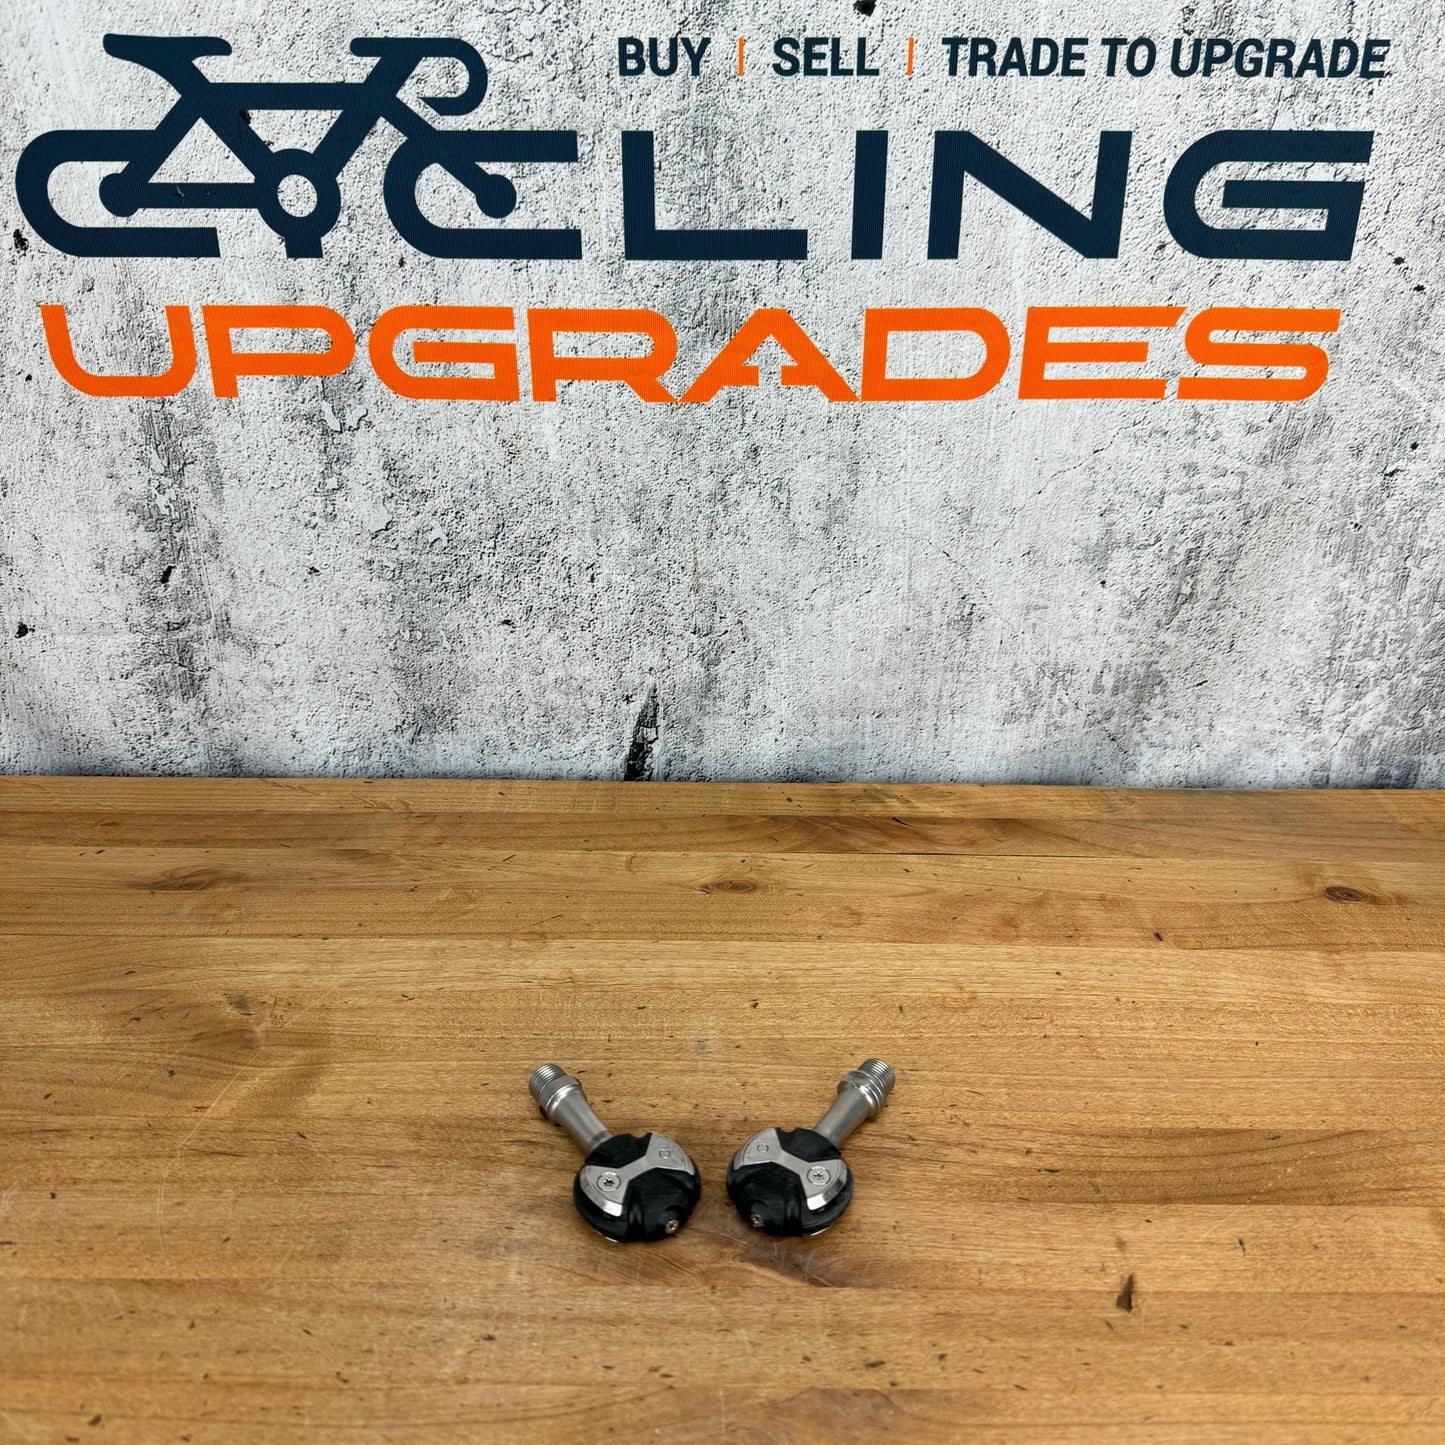 Speedplay Zero Stainless Steel Spindle Clipless Bike Pedals 207g